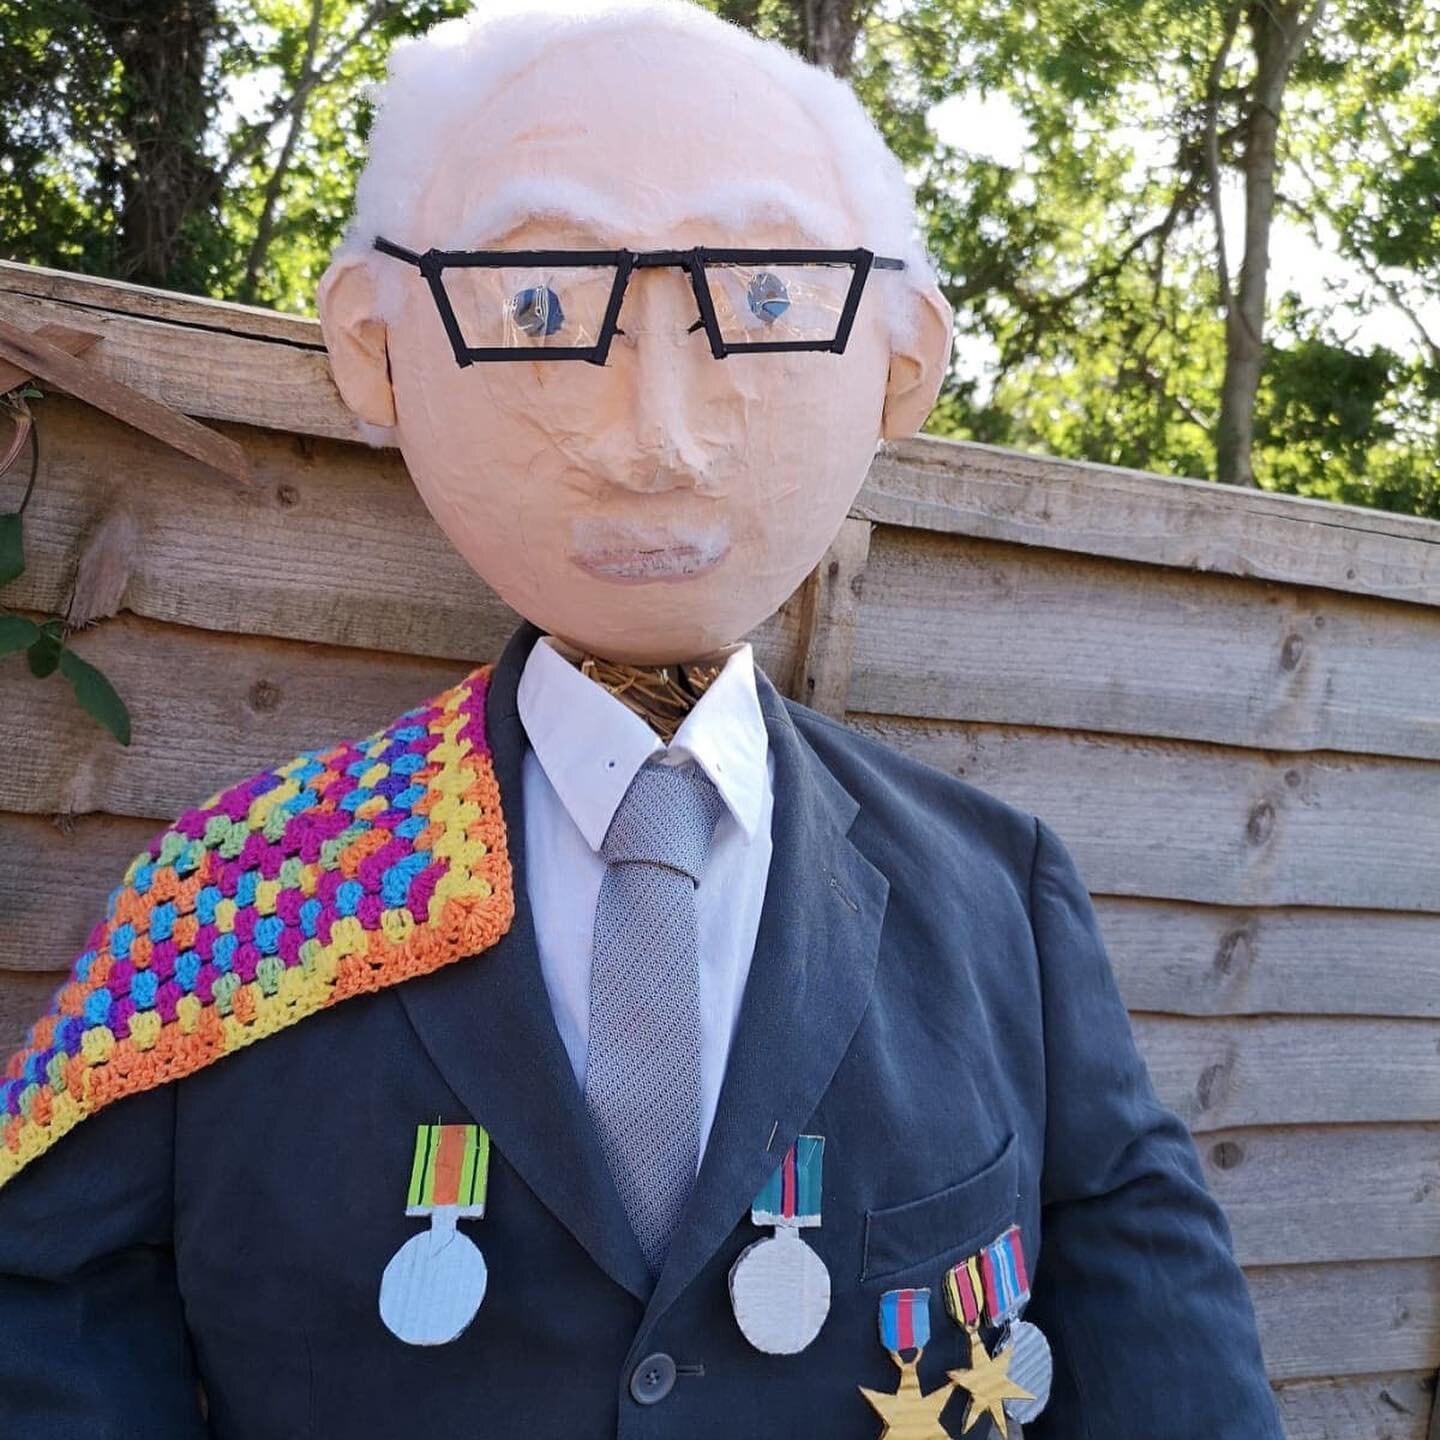 Look what my grandchildren have made for Battle scarecrow competition.
#capraintommoore